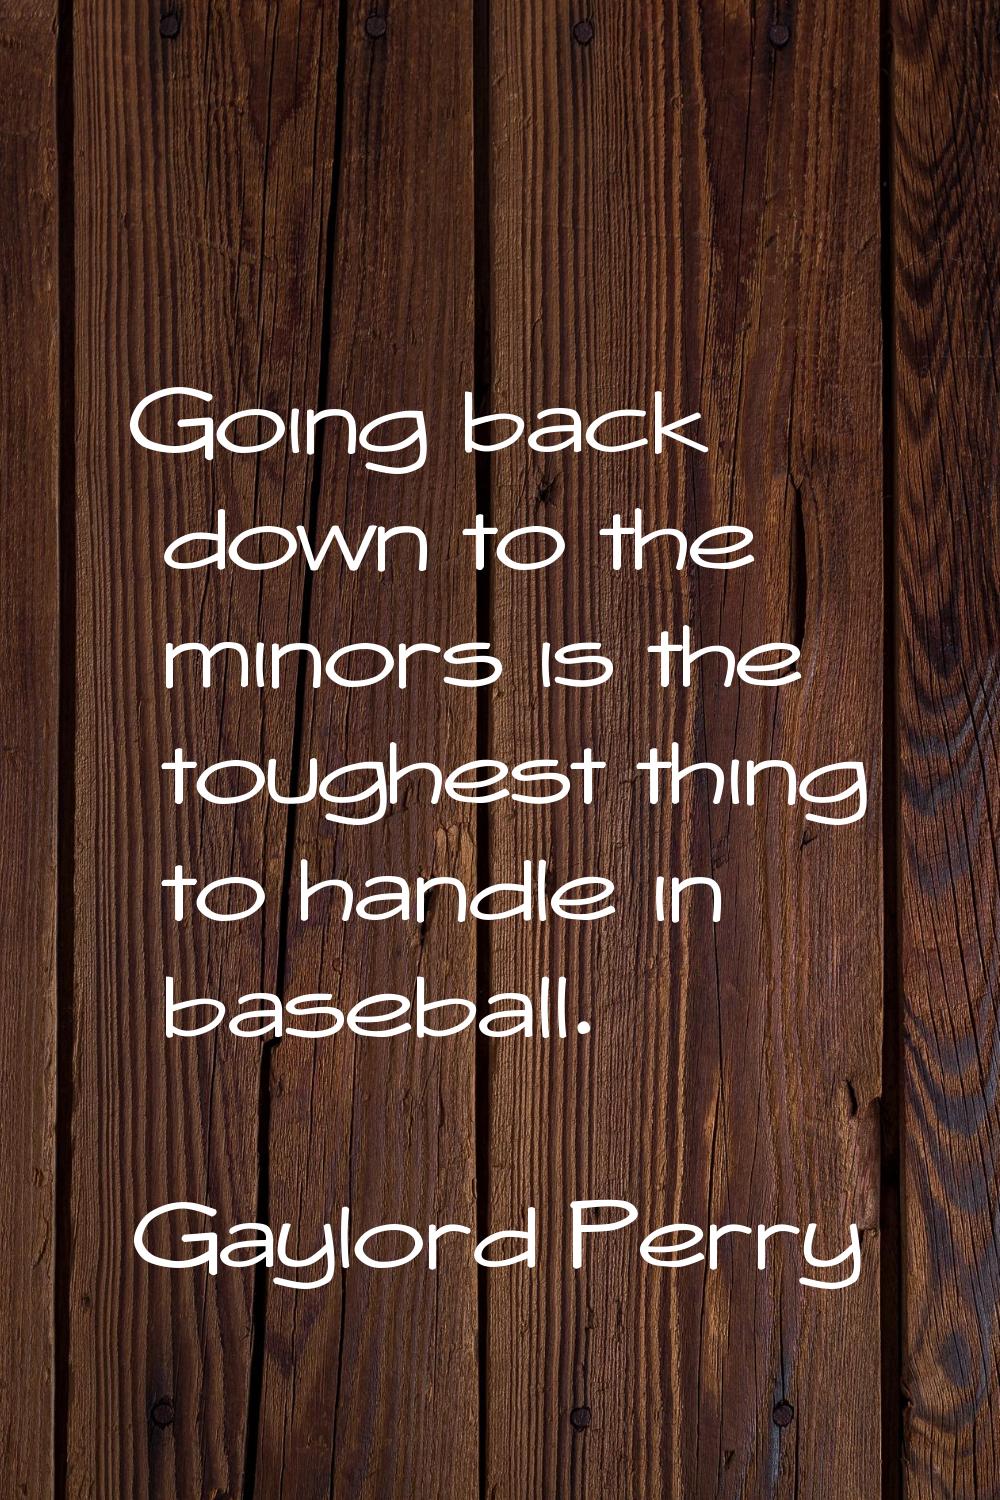 Going back down to the minors is the toughest thing to handle in baseball.